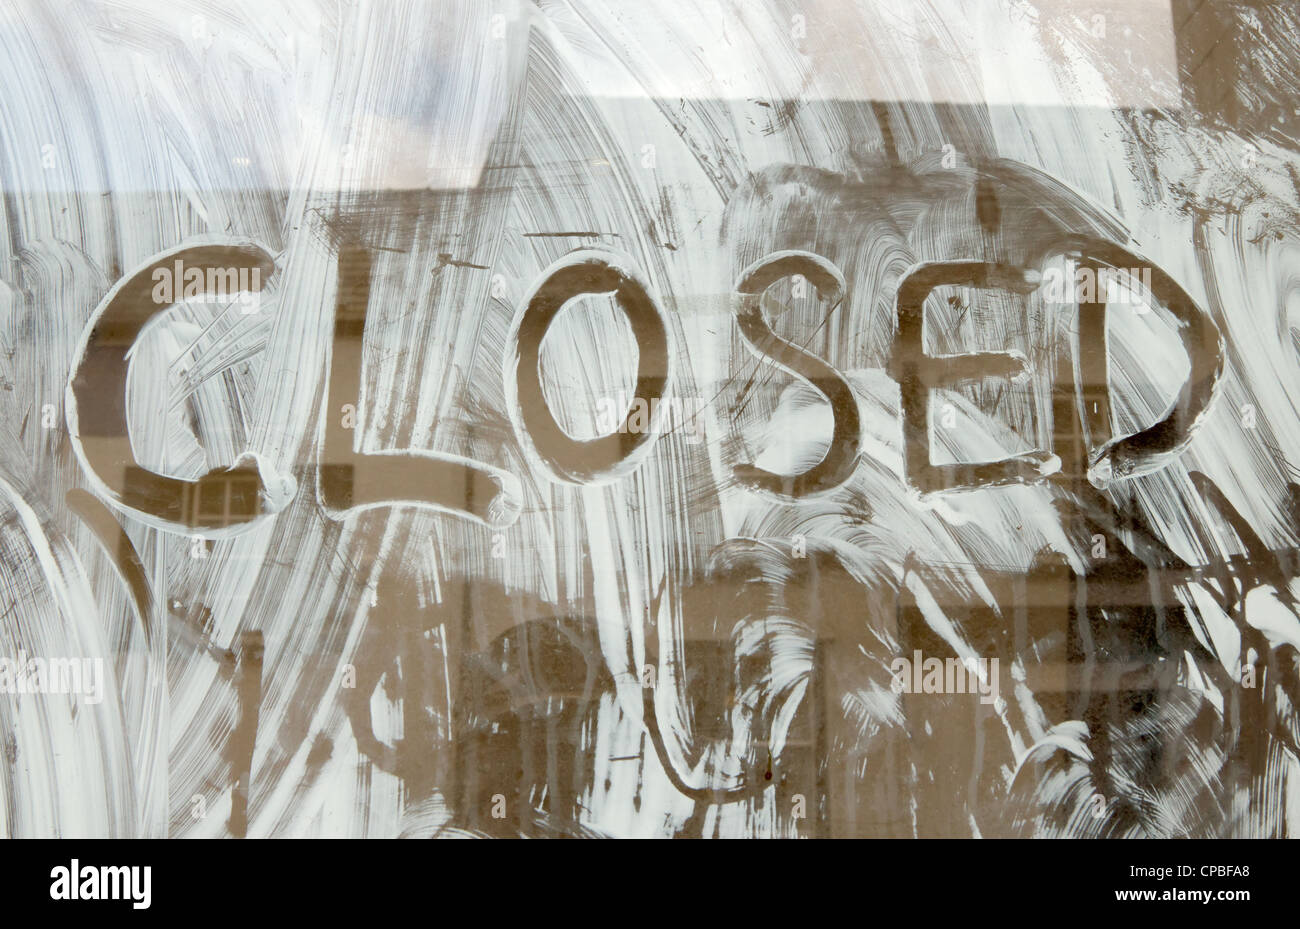 Closed written in the white paint of a shop window. Stock Photo